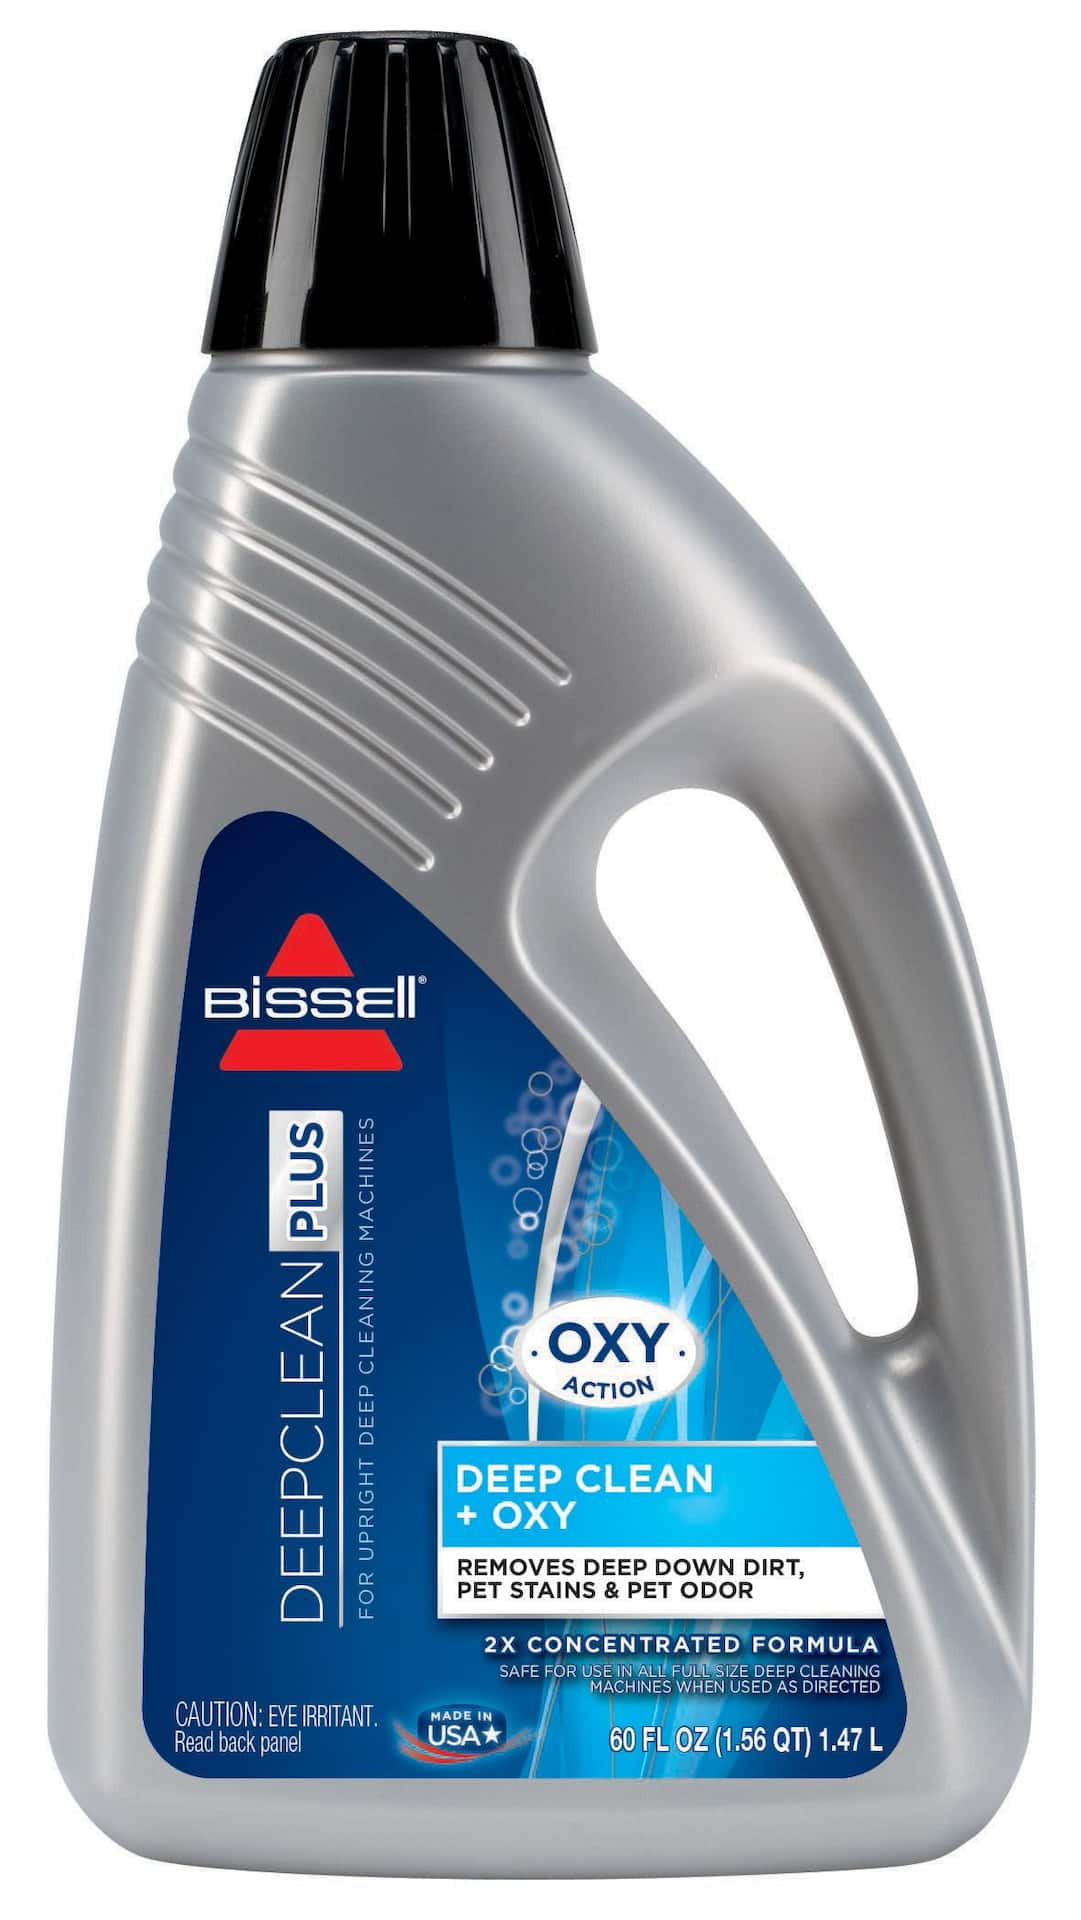 BISSELL Protect Cleaning Formula Carpet Detergent, Clear